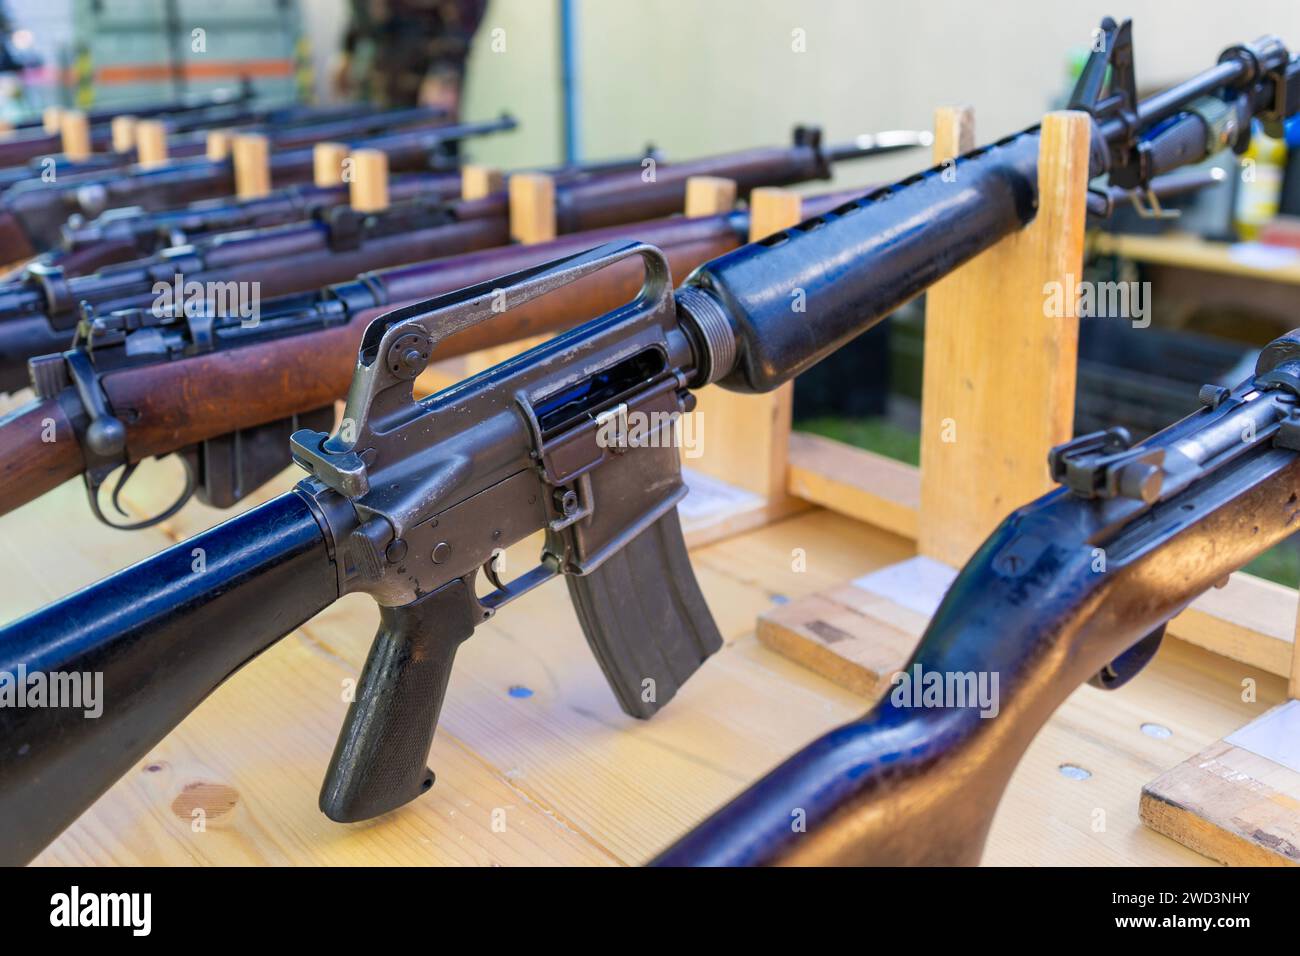 Old American classic M16 assault rifle among other weapons Stock Photo